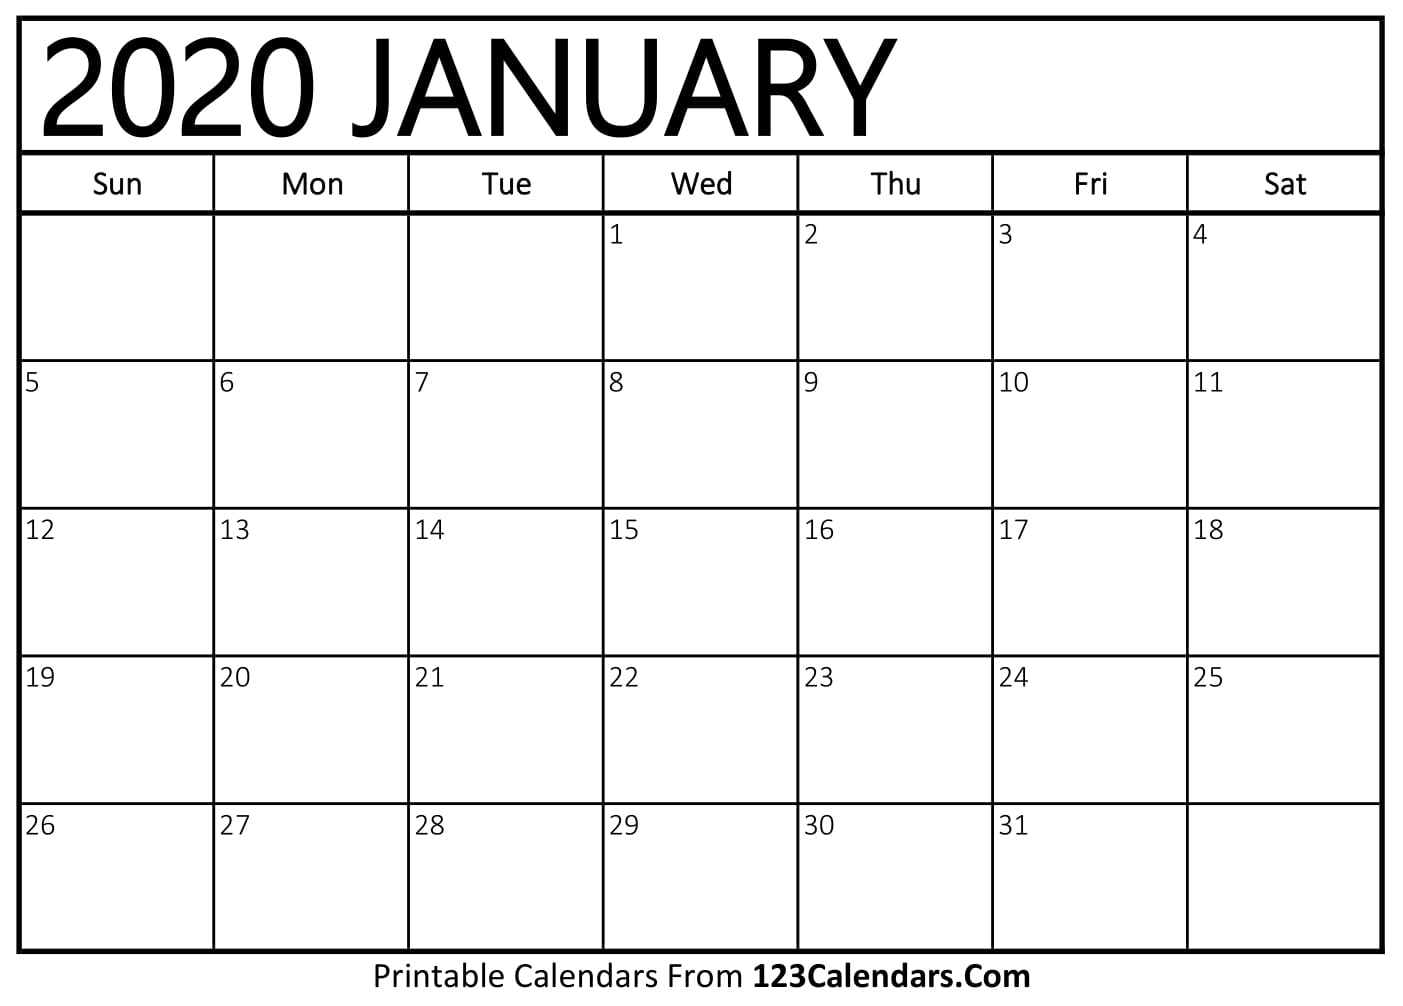 Free Printable Calendar | 123Calendars throughout Print Free Calendars 2020Without Downloading